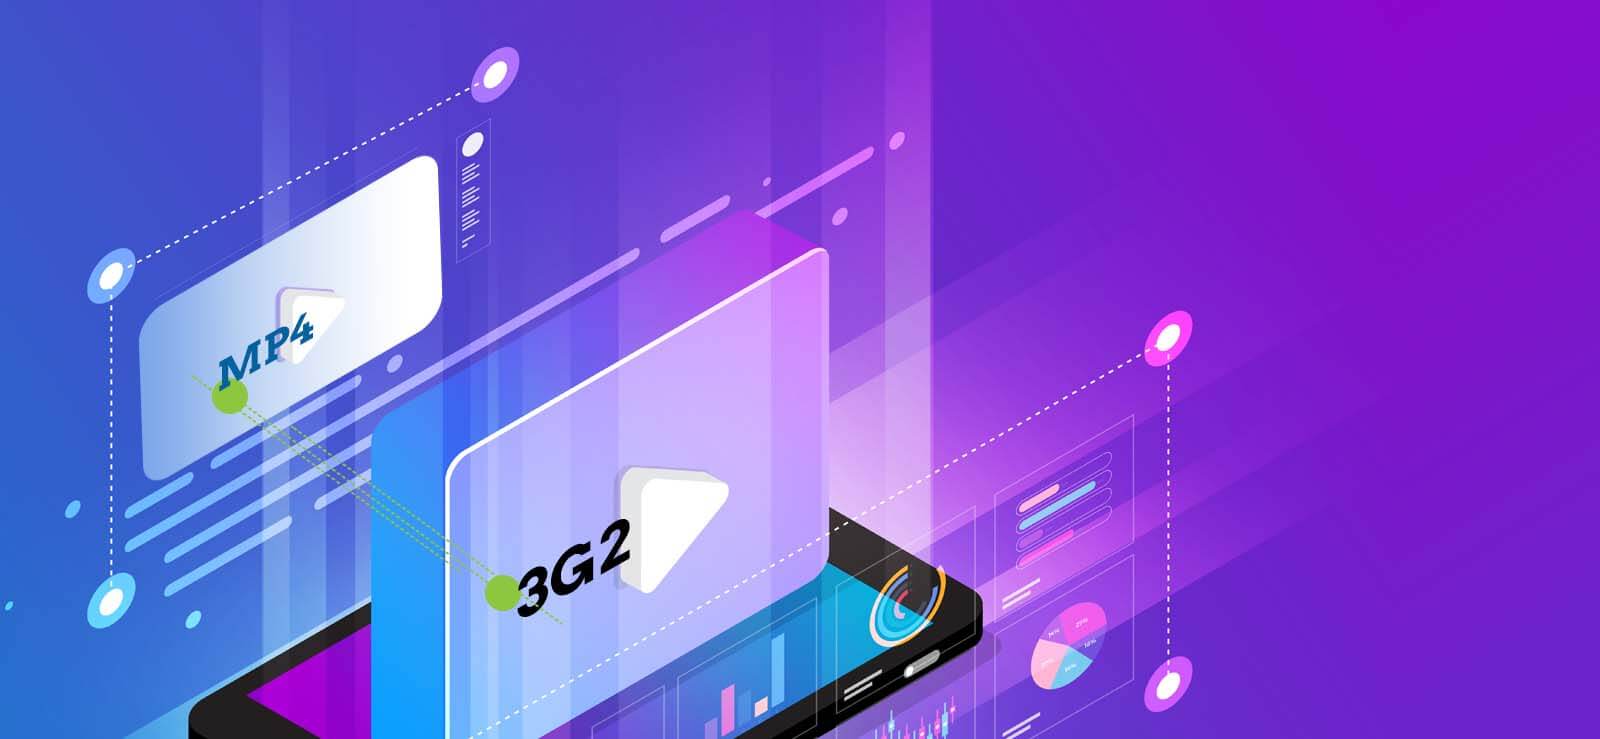 How to Convert MP4 to 3G2 Format?